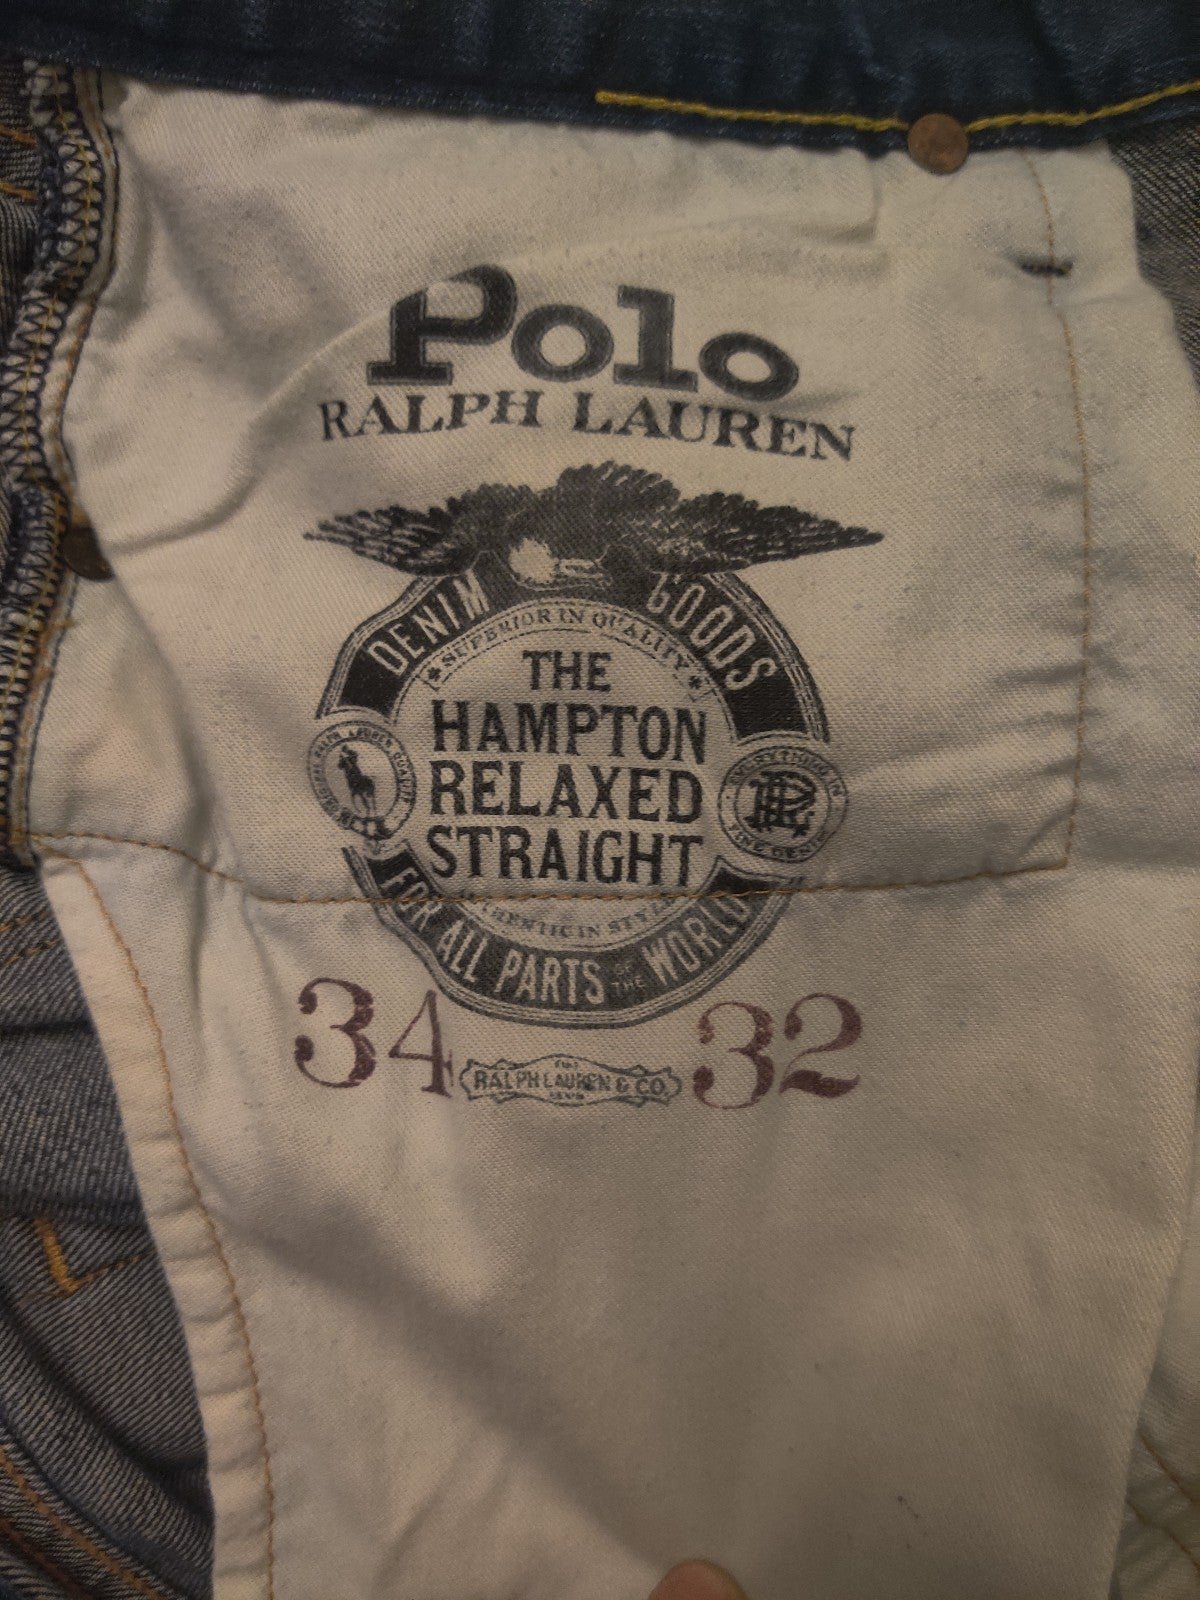 The Best Seller Polo Ralph Lauren Denim Jeans 34x32 fq1akHuJy just for you